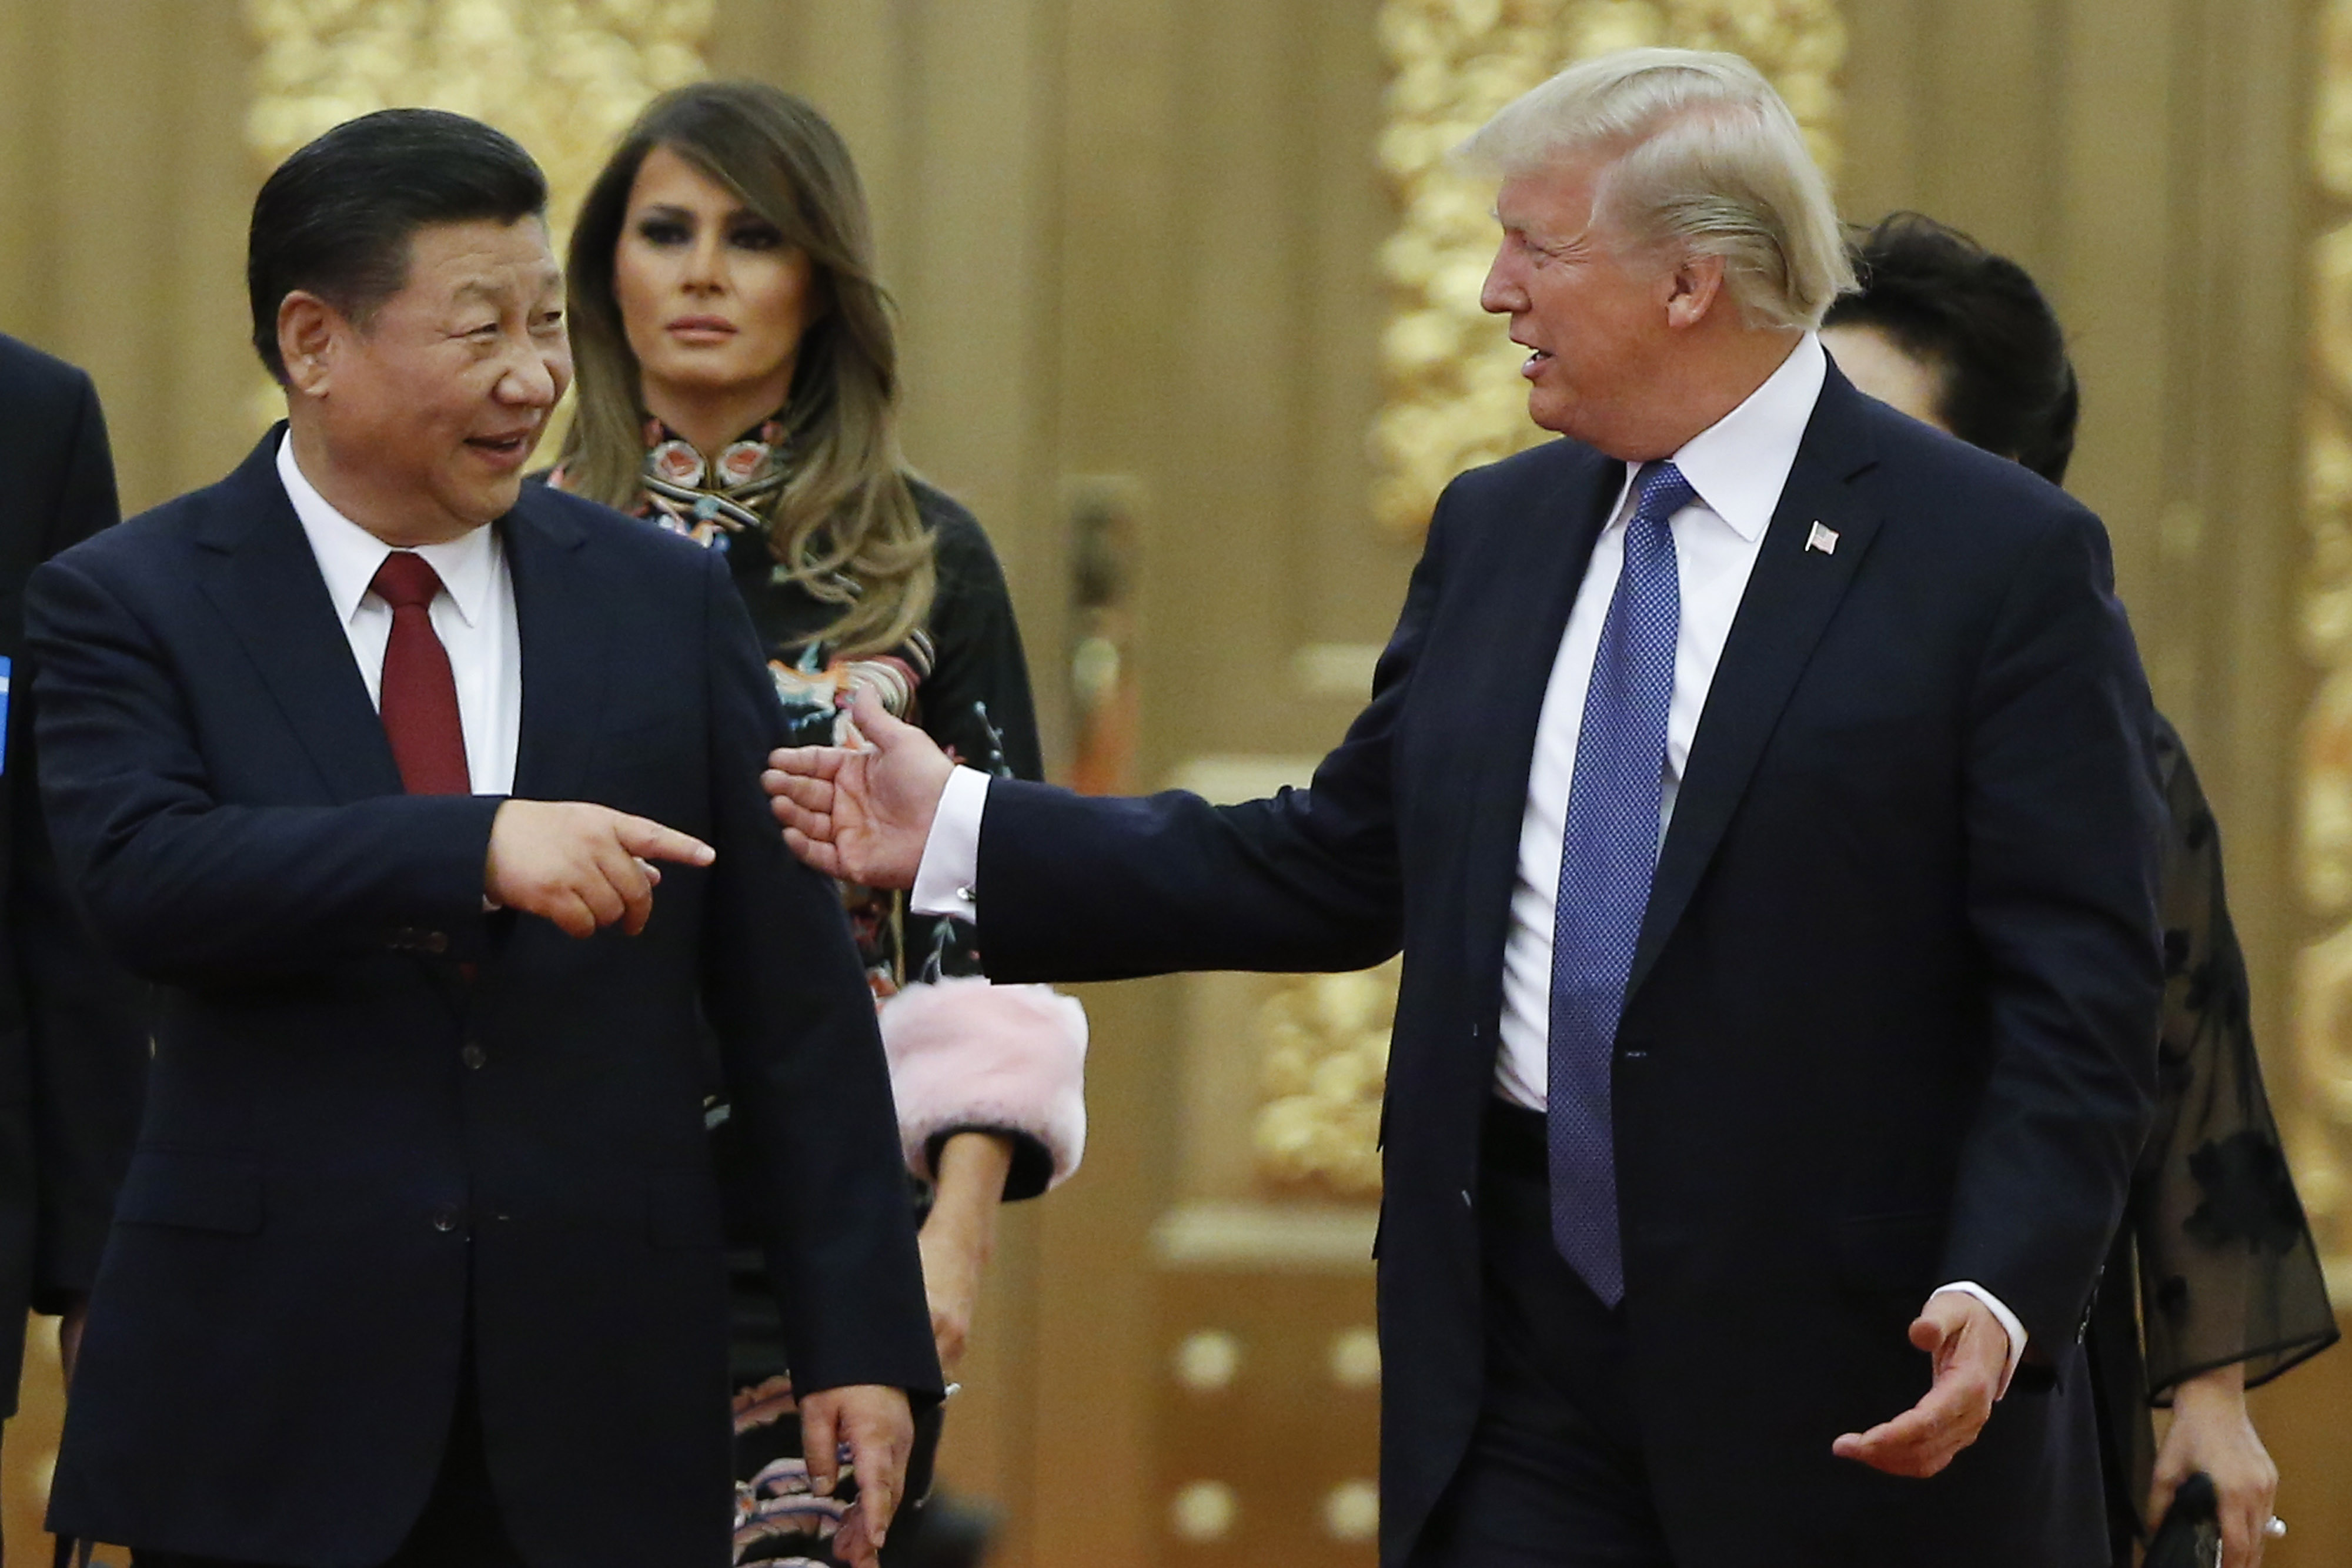 U.S. President Donald Trump and China's President Xi Jinping arrive at a state dinner at the Great Hall of the People on November 9, 2017 in Beijing, China. Thomas Peter - Pool/Getty Images